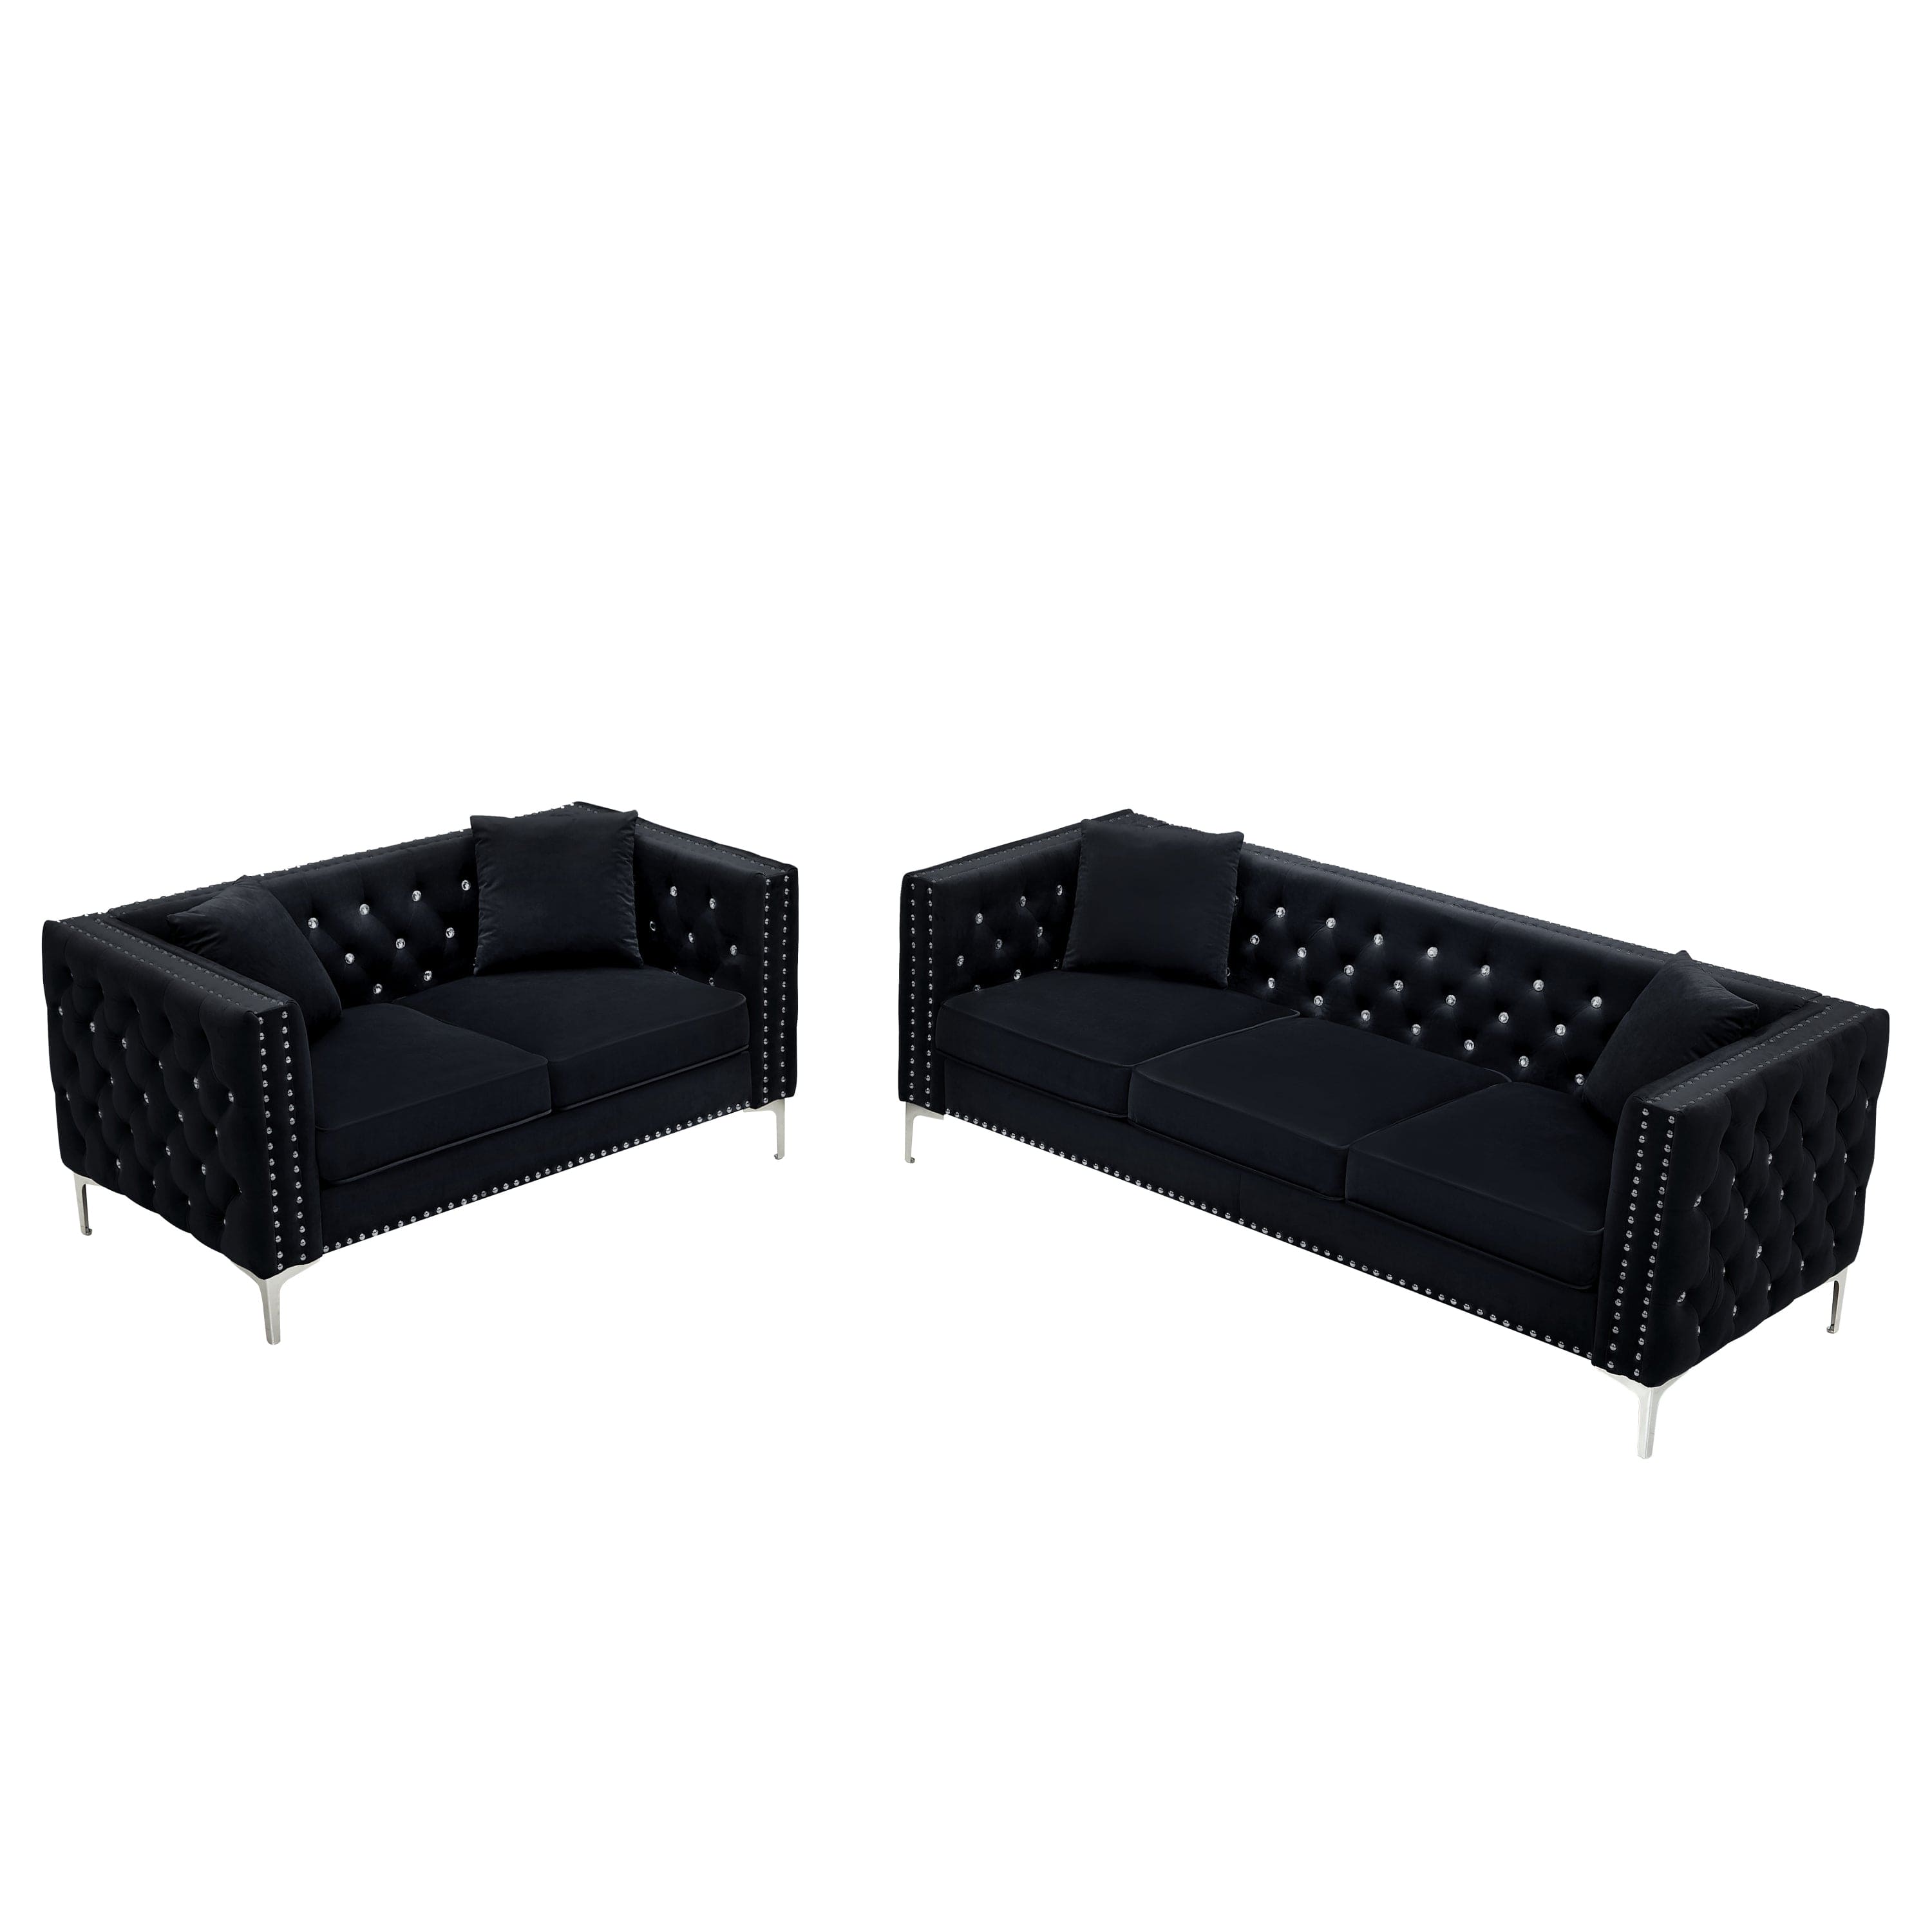 2 Piece Modern Velvet Living Room Set with Sofa and Loveseat,Jeweled Button Tufted Copper Nails Square Arms Black,4 Pillows Included